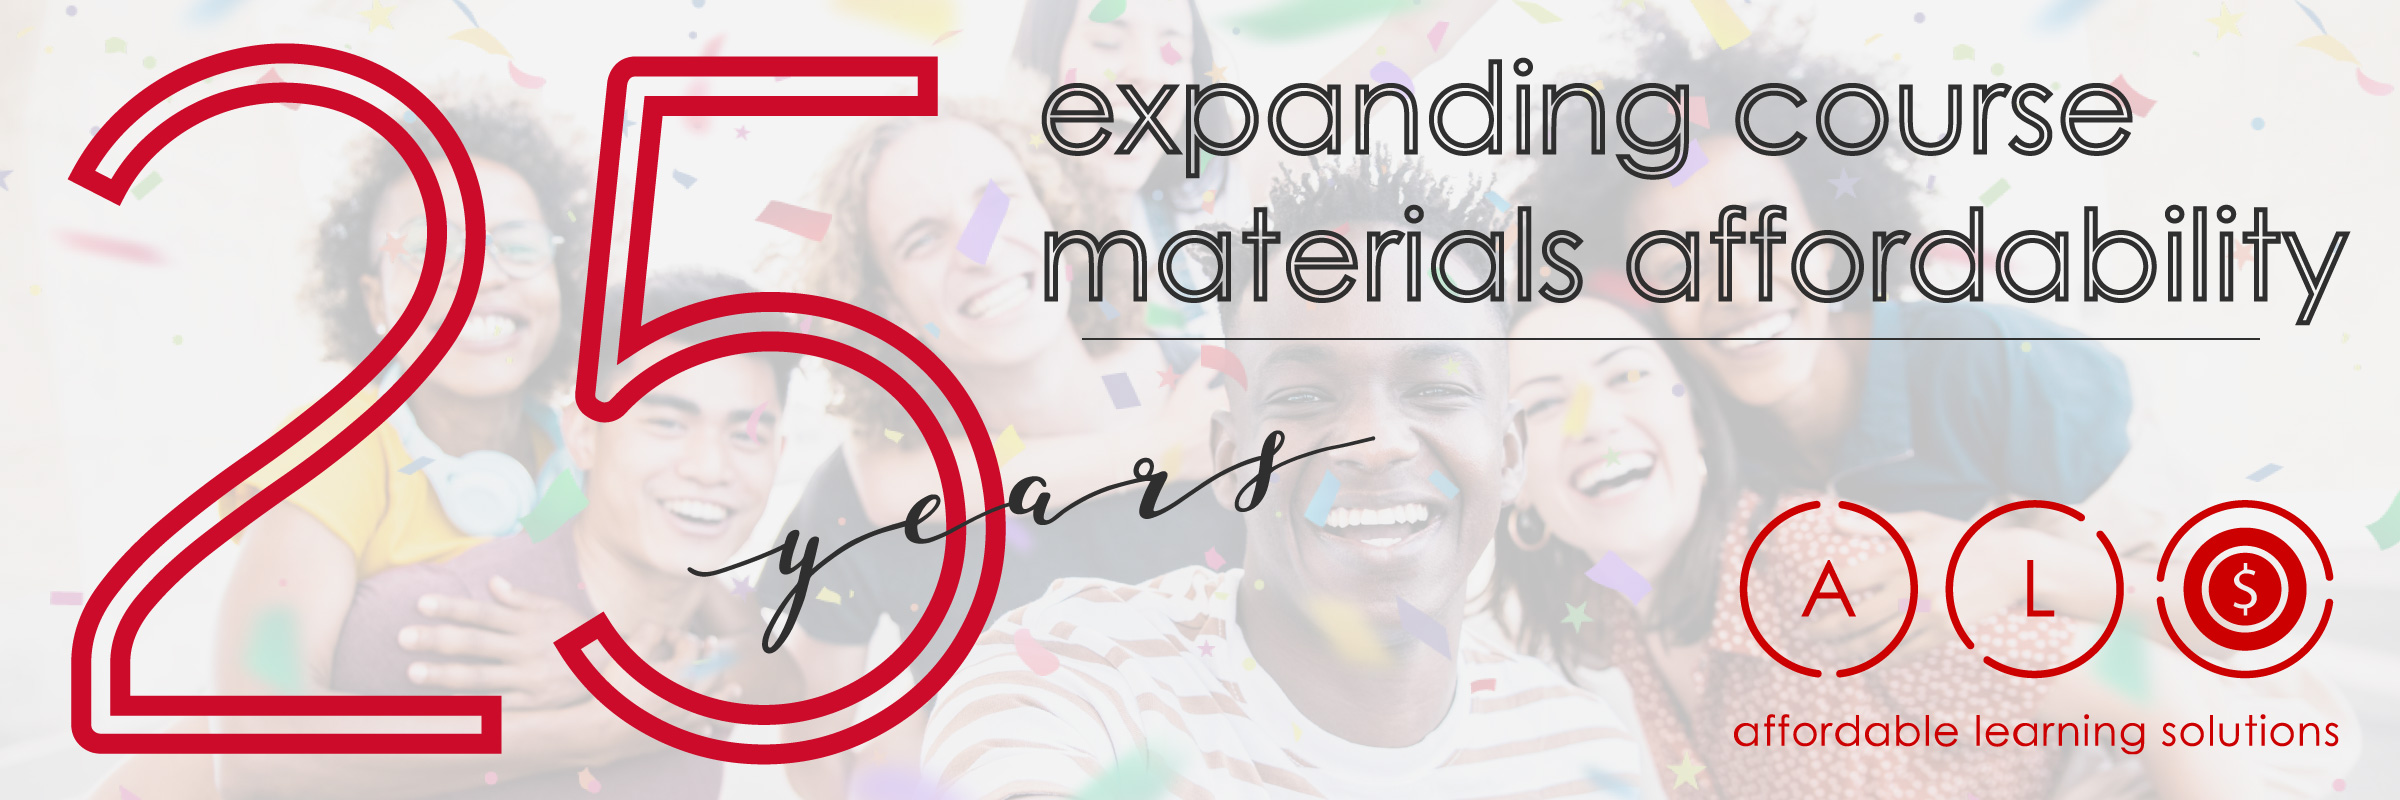 25 Years Expanding Course Material Affordability